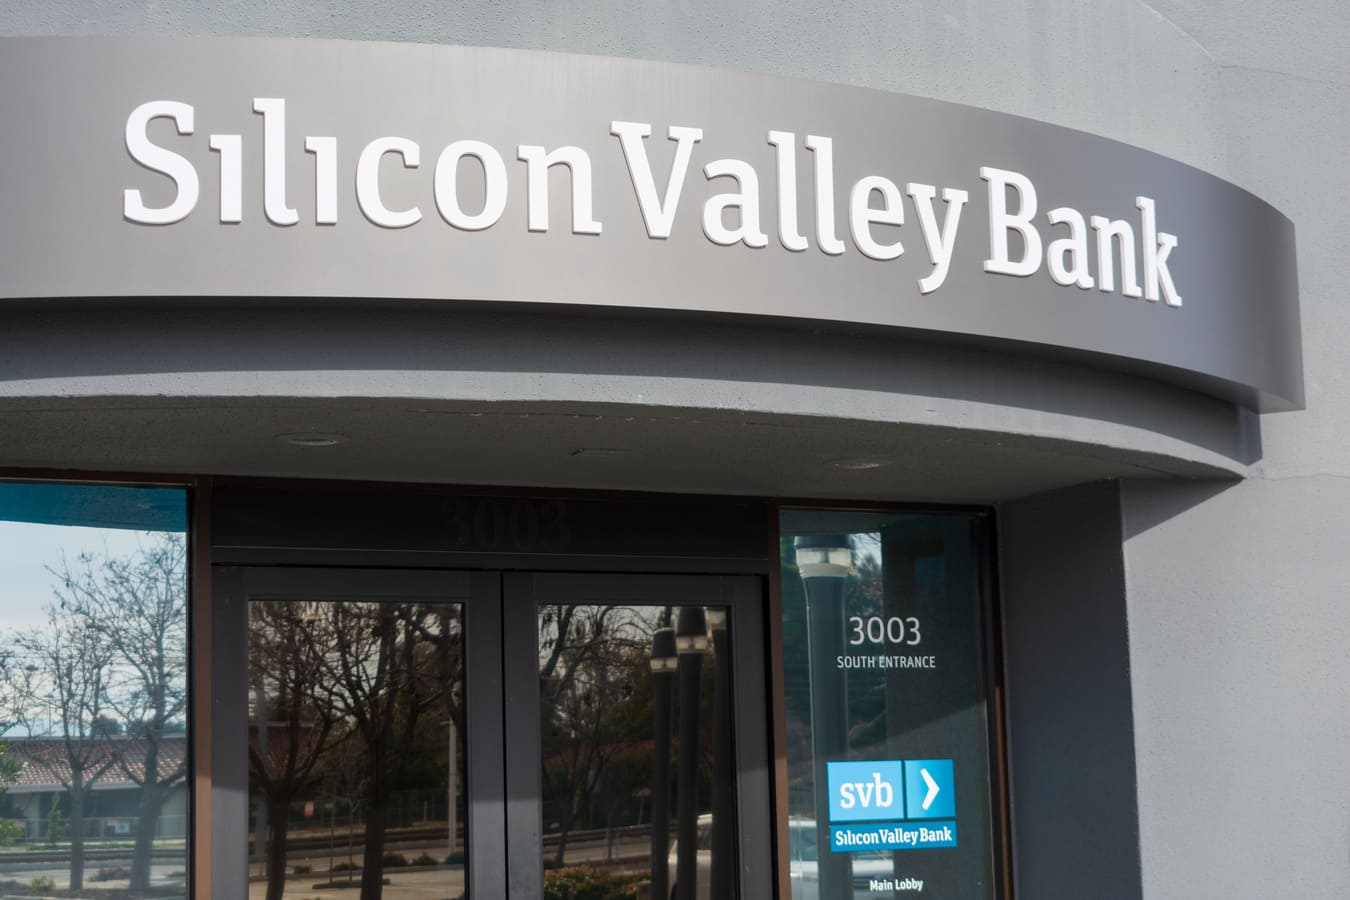 California's SVB Becomes Second-Largest US Bank to Fail